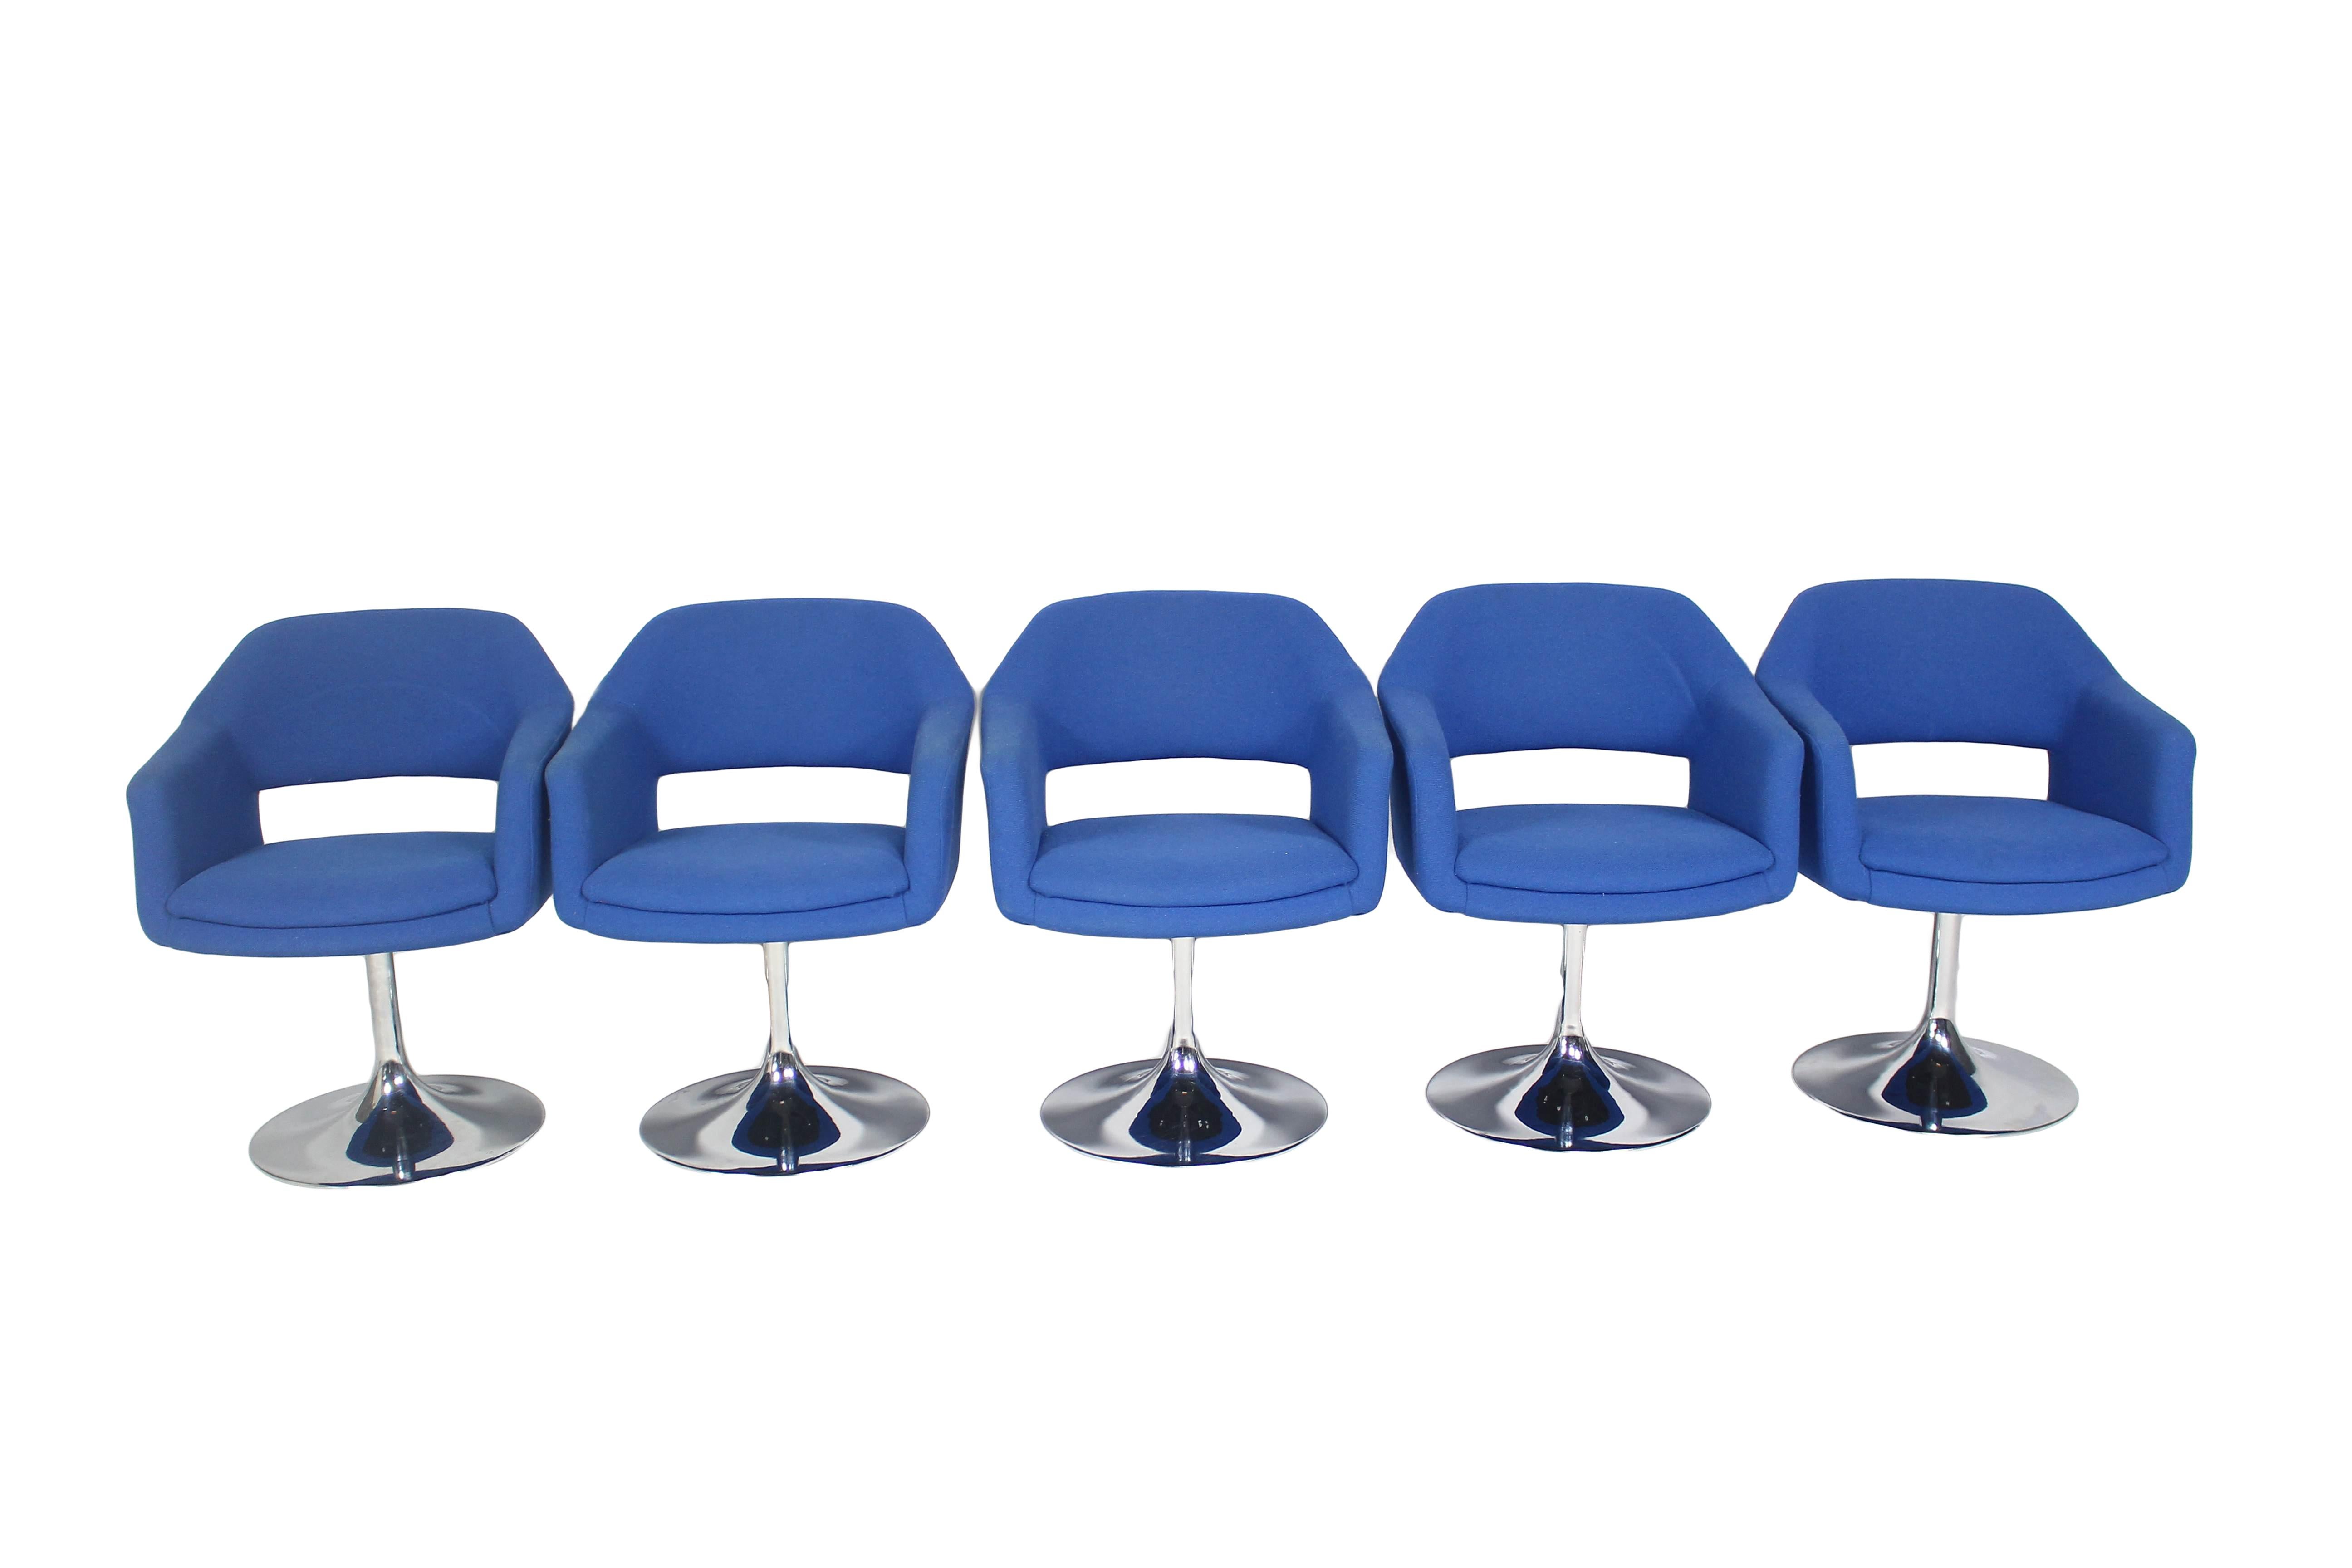 Set of 5 swivel chairs model Largo.
Made by Johanson Design in Sweden. 
Good condition.
Price for set of 5 chairs.